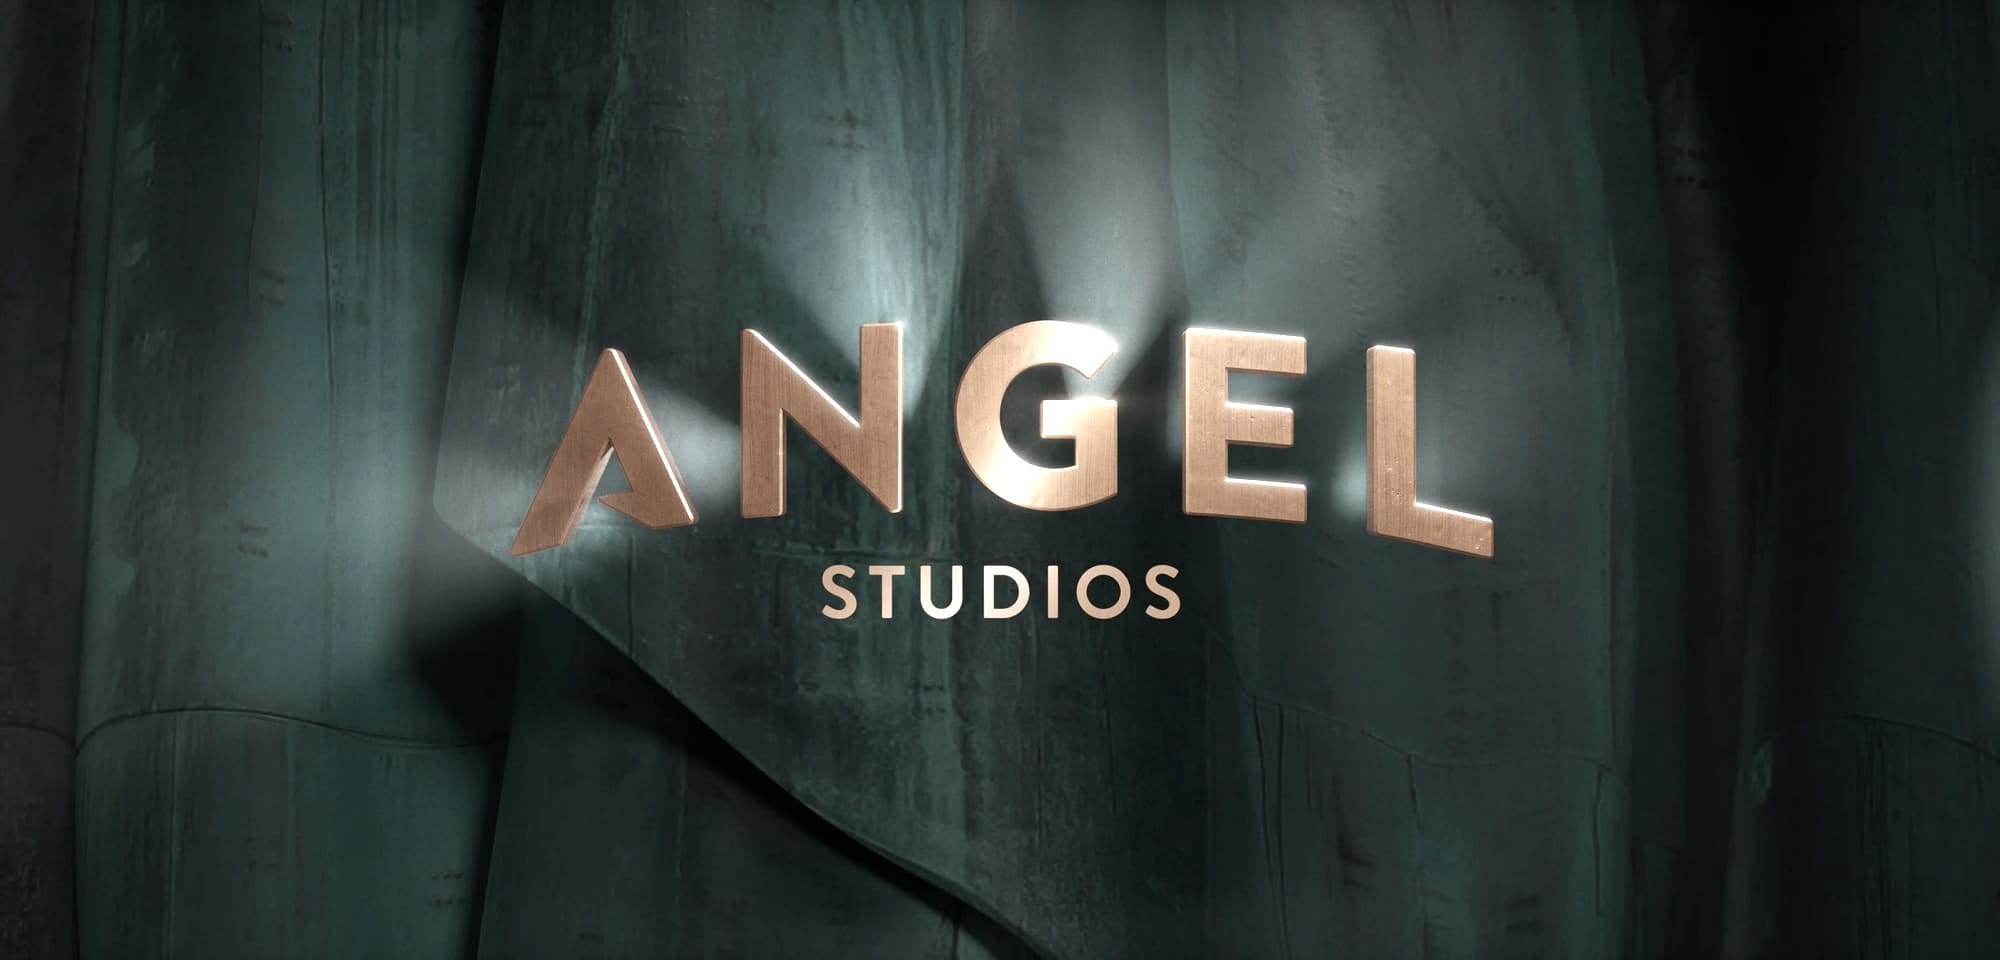 Want Better Movies? Angel Studios Challenges Hollywood Again With Three New Upcoming Films